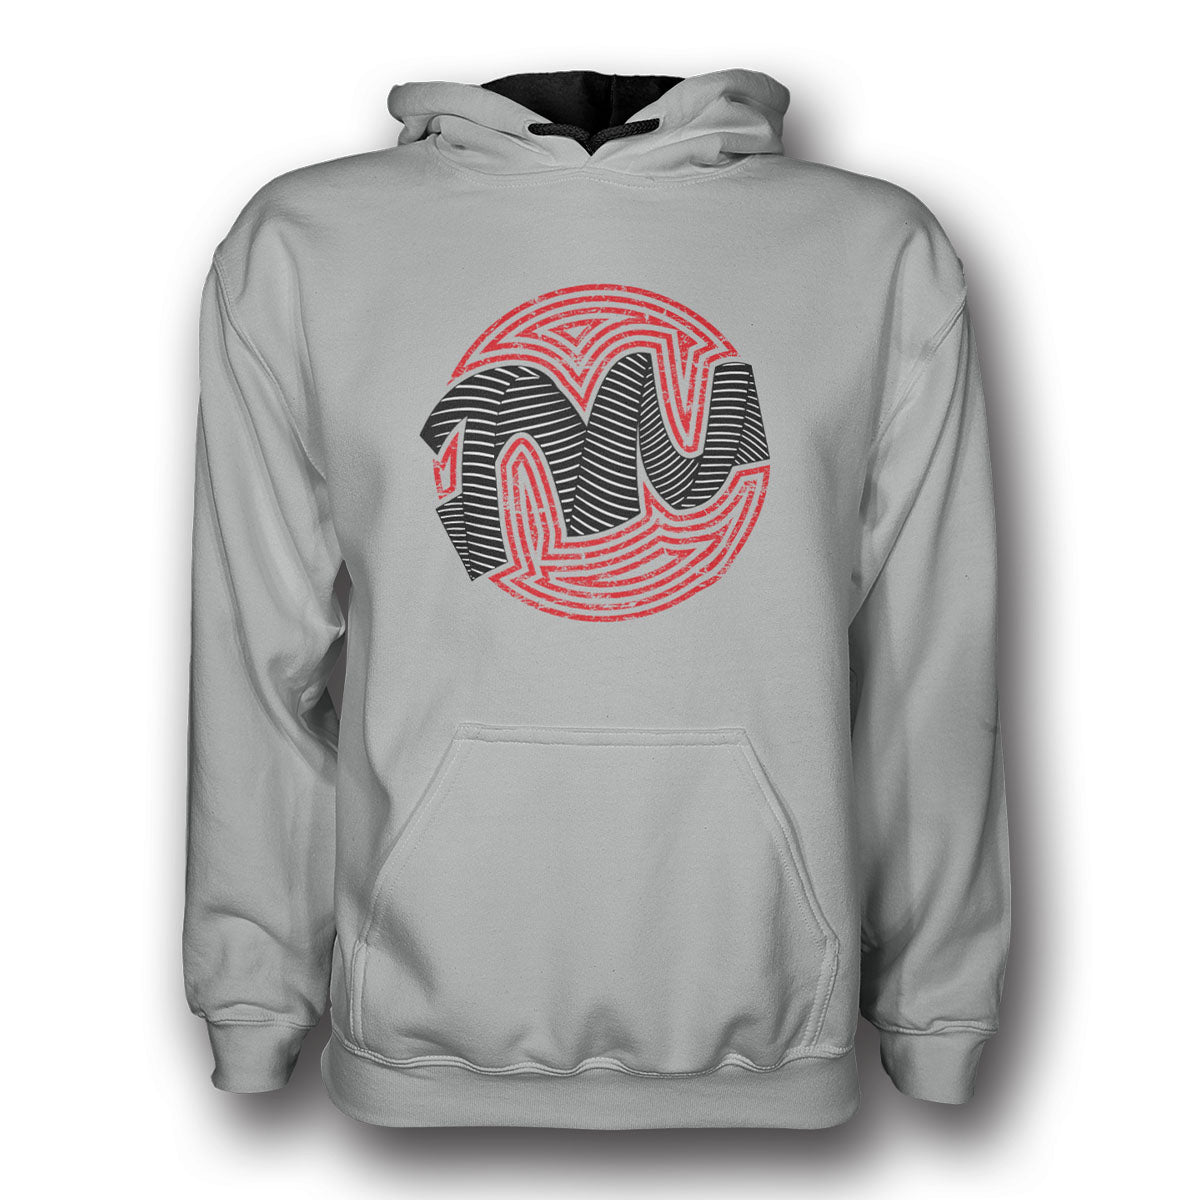 Hoodie Grey/Red by Twisted Messes